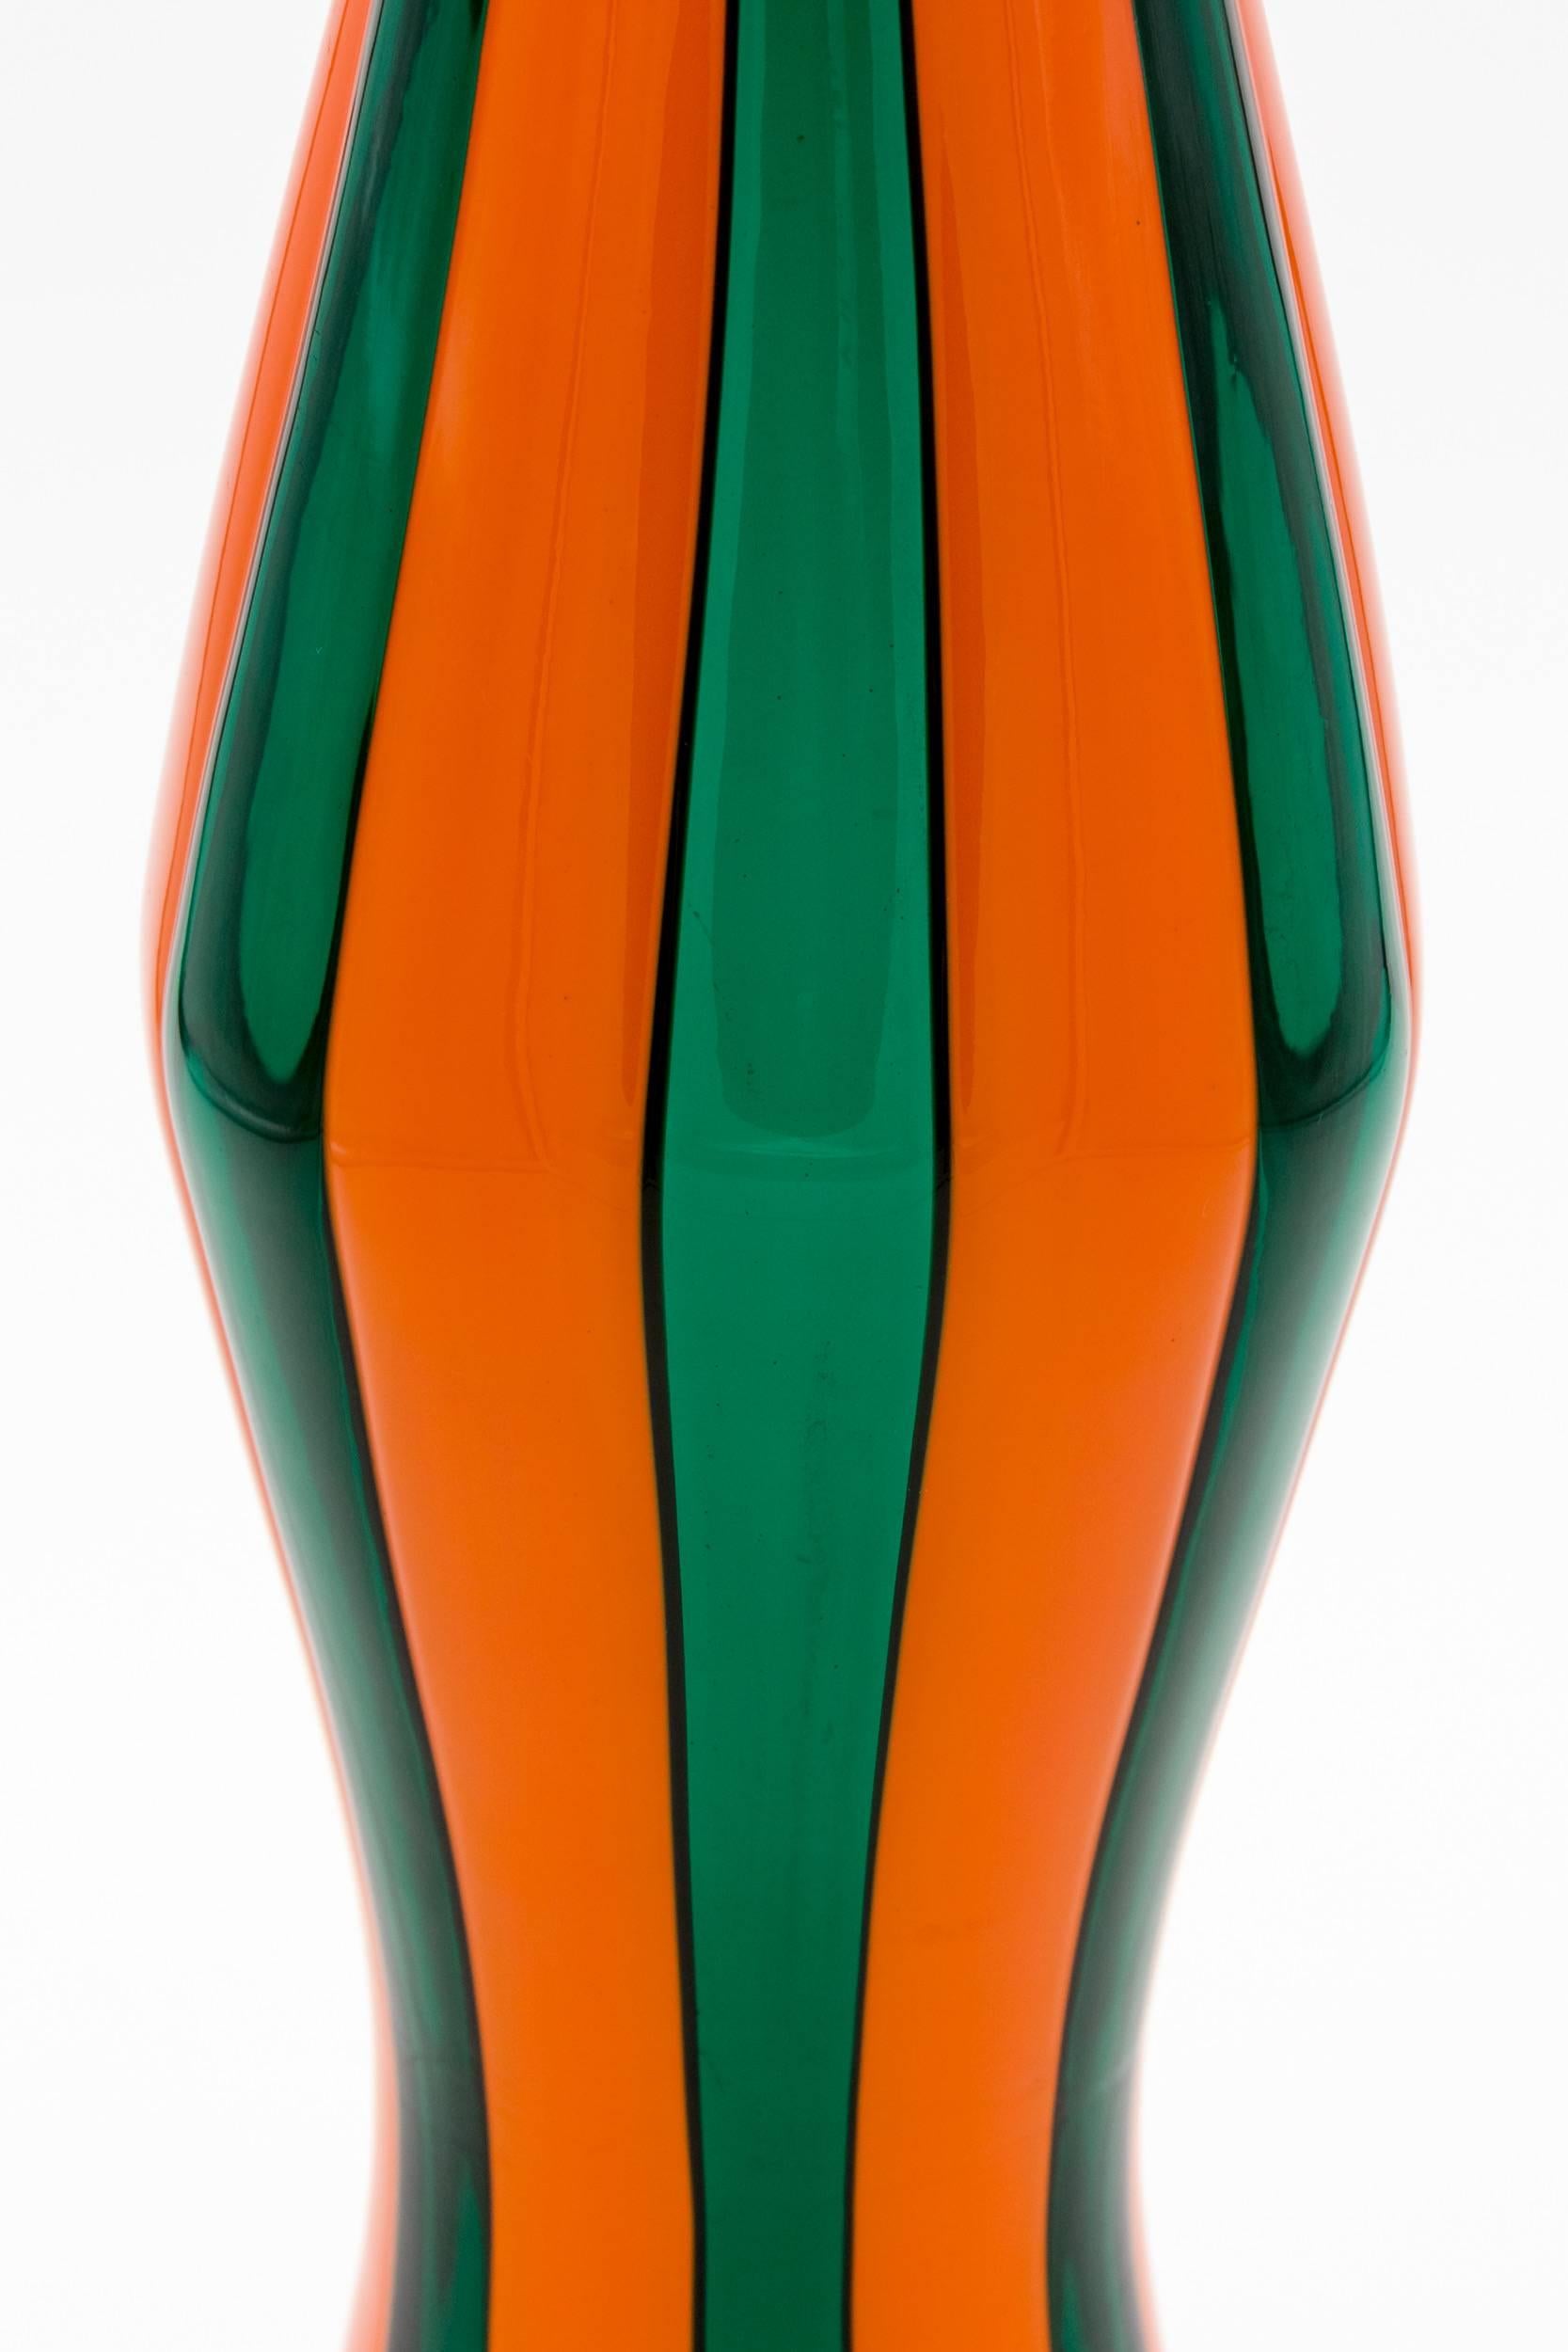 A rare vase in vibrant color combination of green and opaque orange glass.